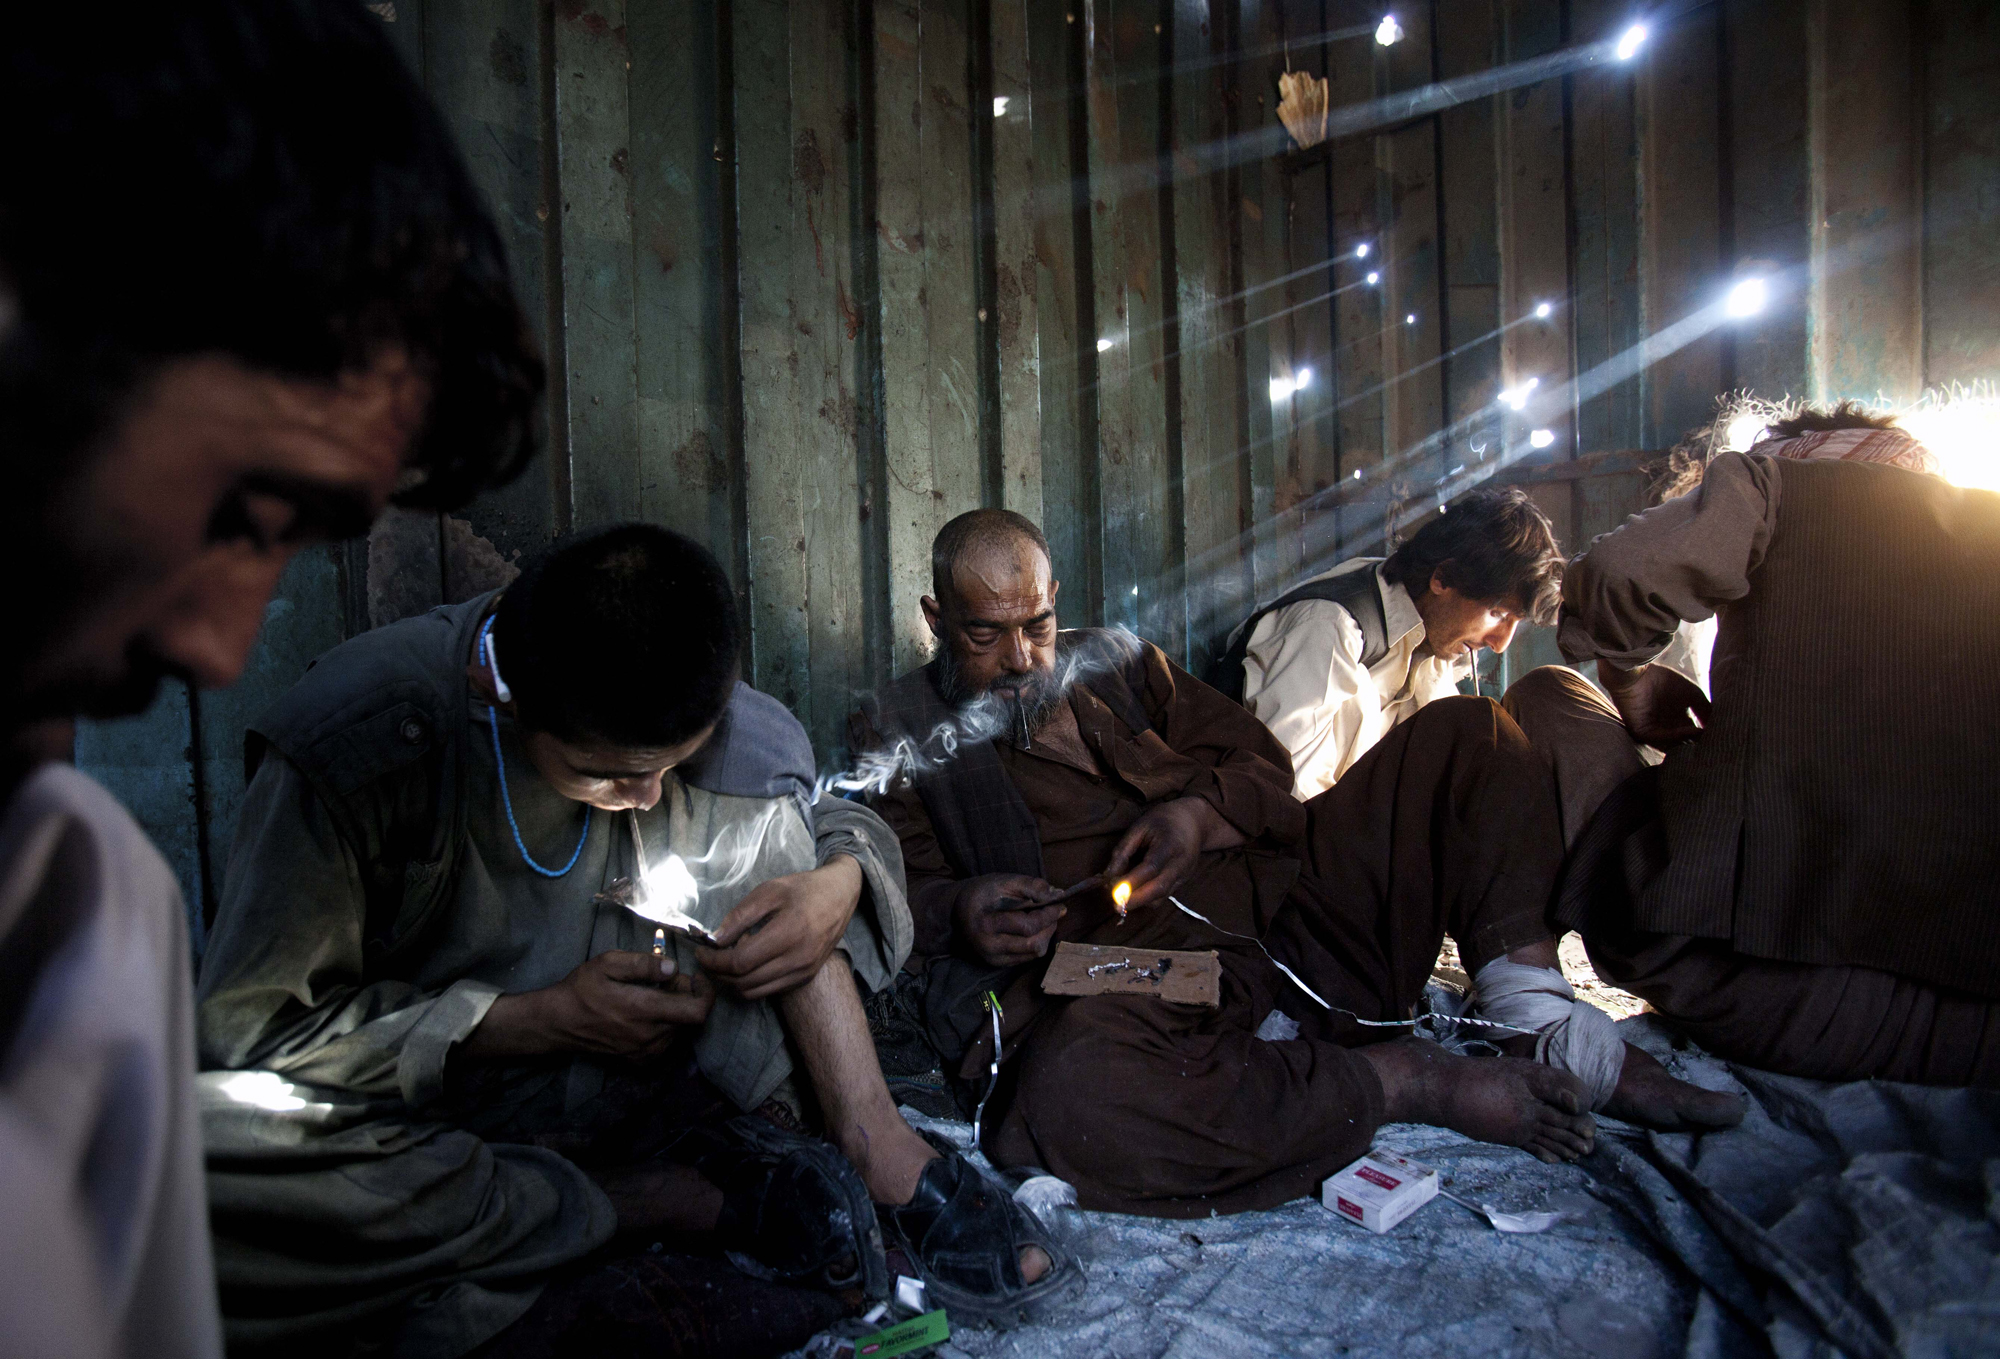 Sunlight pours through shrapnel holes in a shipping container in Kabul's Old City, where users gather for a hit of opium, June 23, 2010.